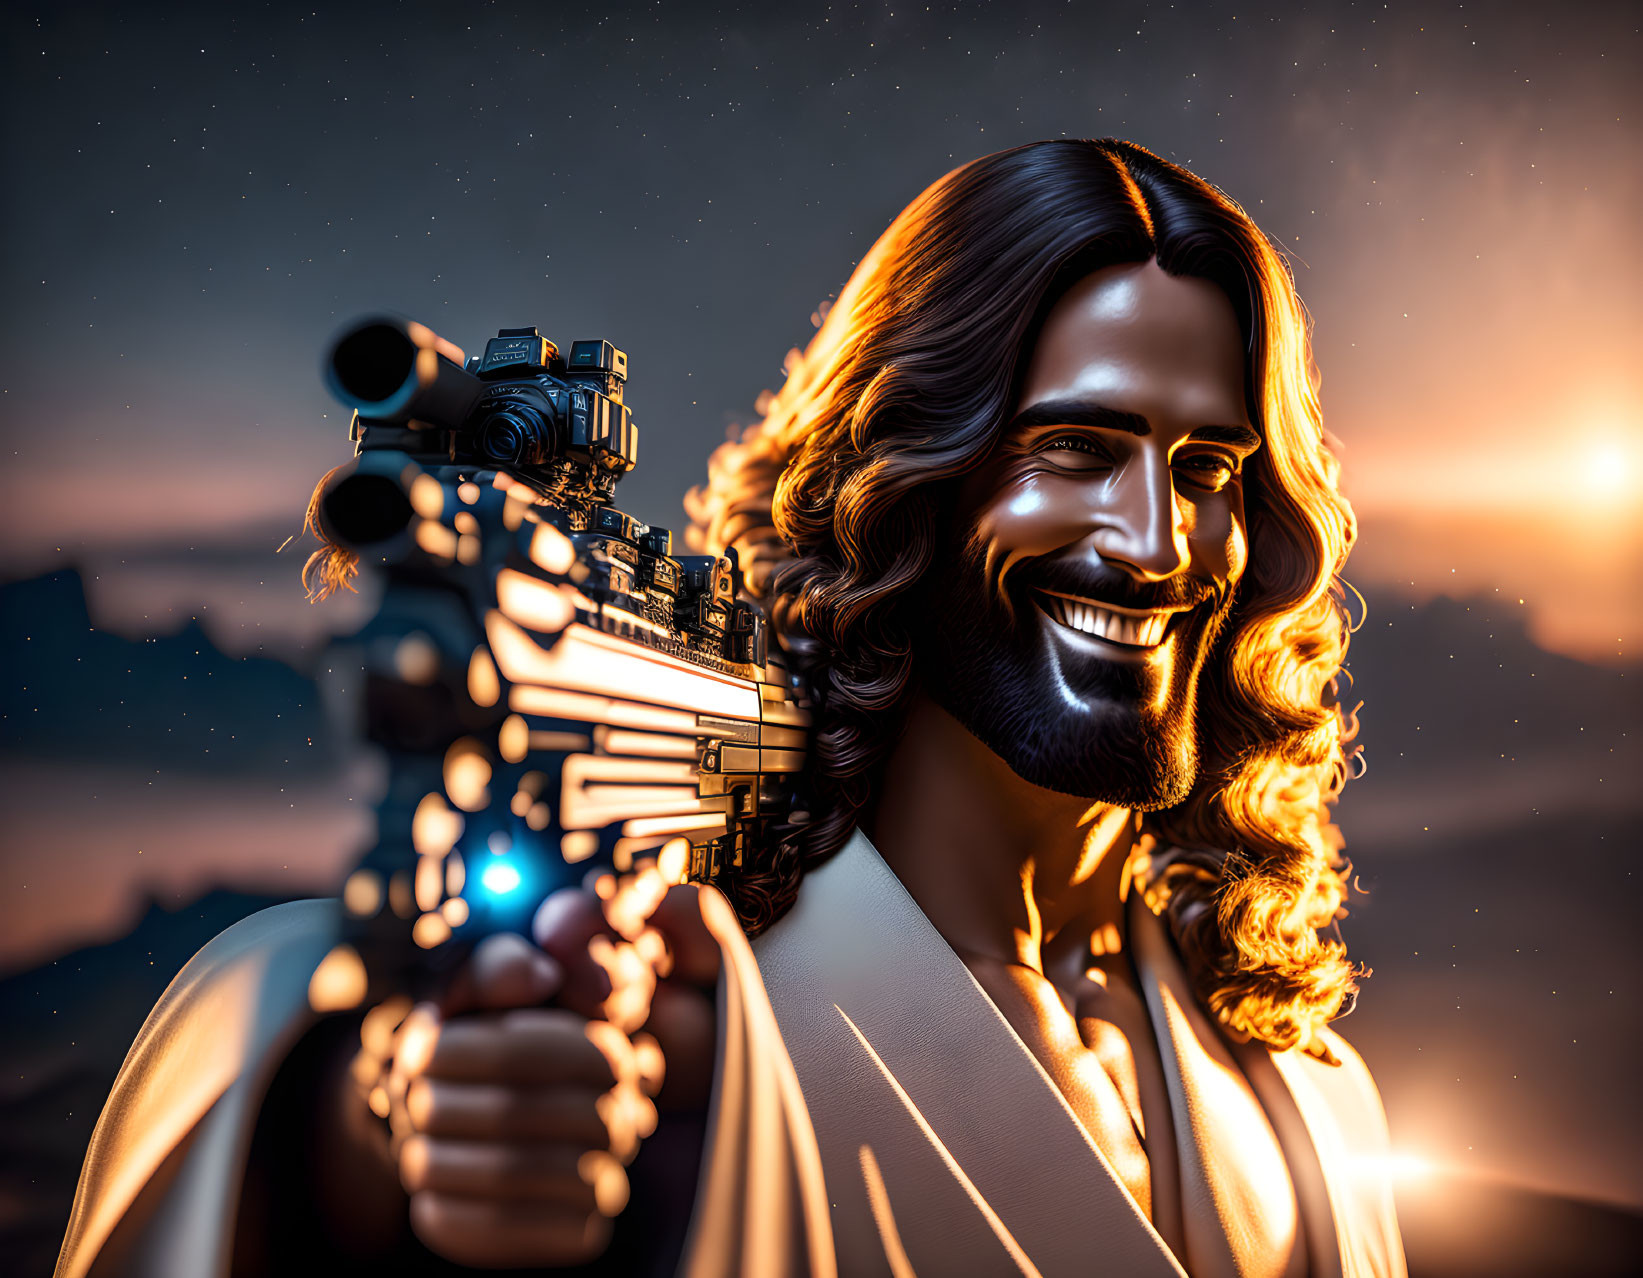 Smiling man with long hair and beard holding futuristic gun in stylized illustration